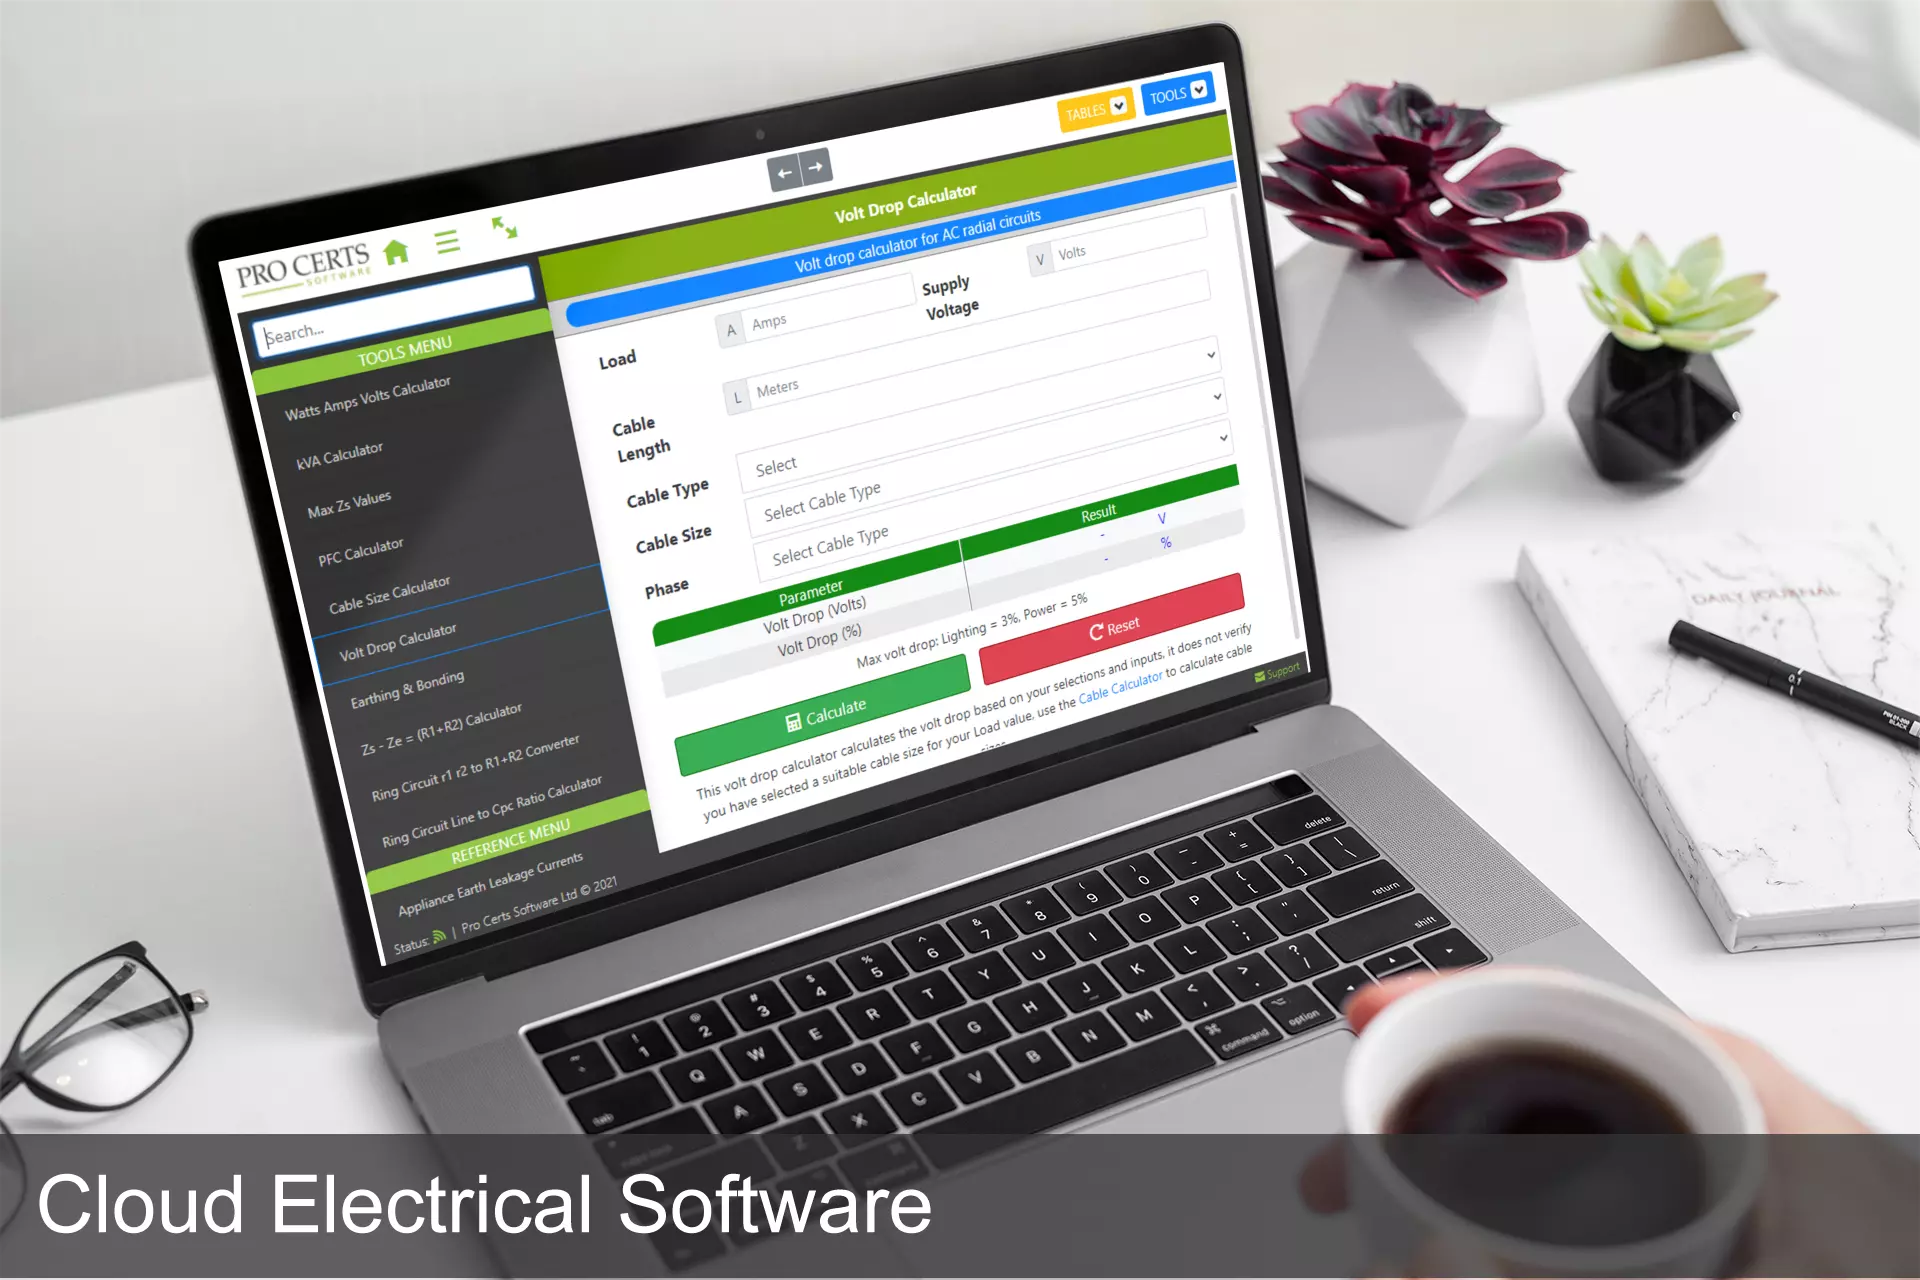 Cloud Electrical Software